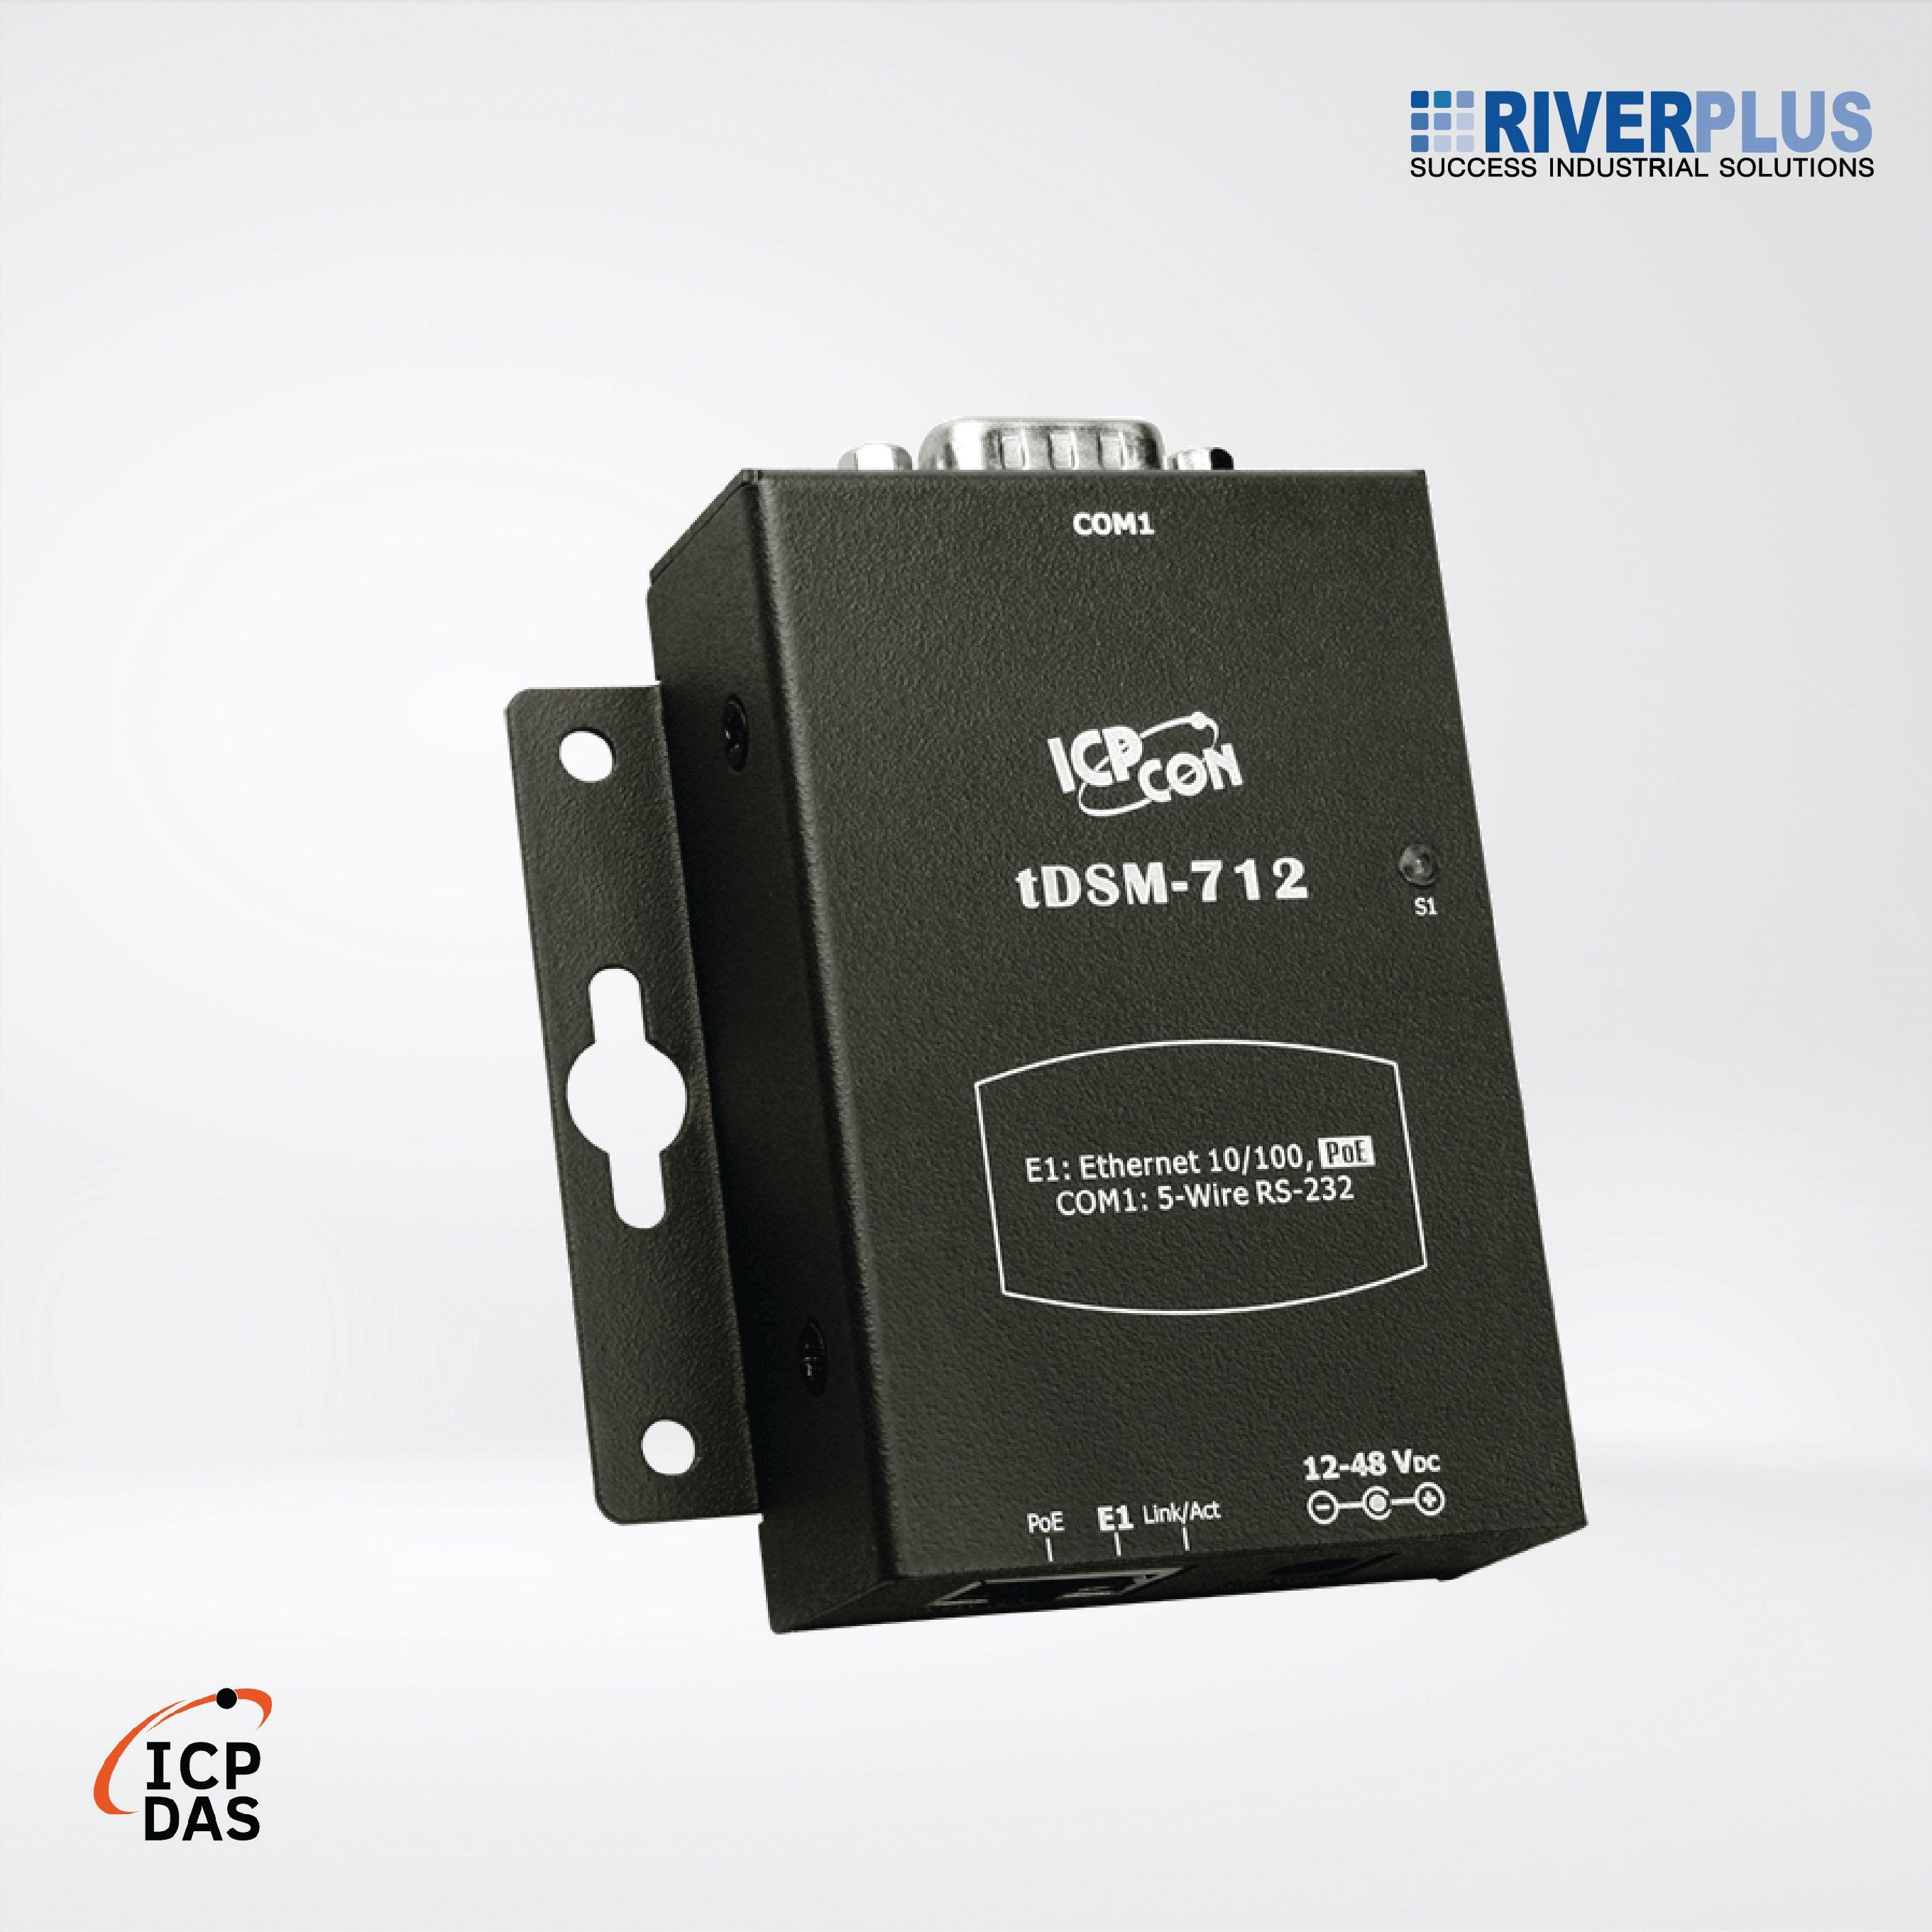 tDSM-712 CR Tiny (1x RS-232) Serial-to-Ethernet Device Server with PoE (Metal Case) - Riverplus